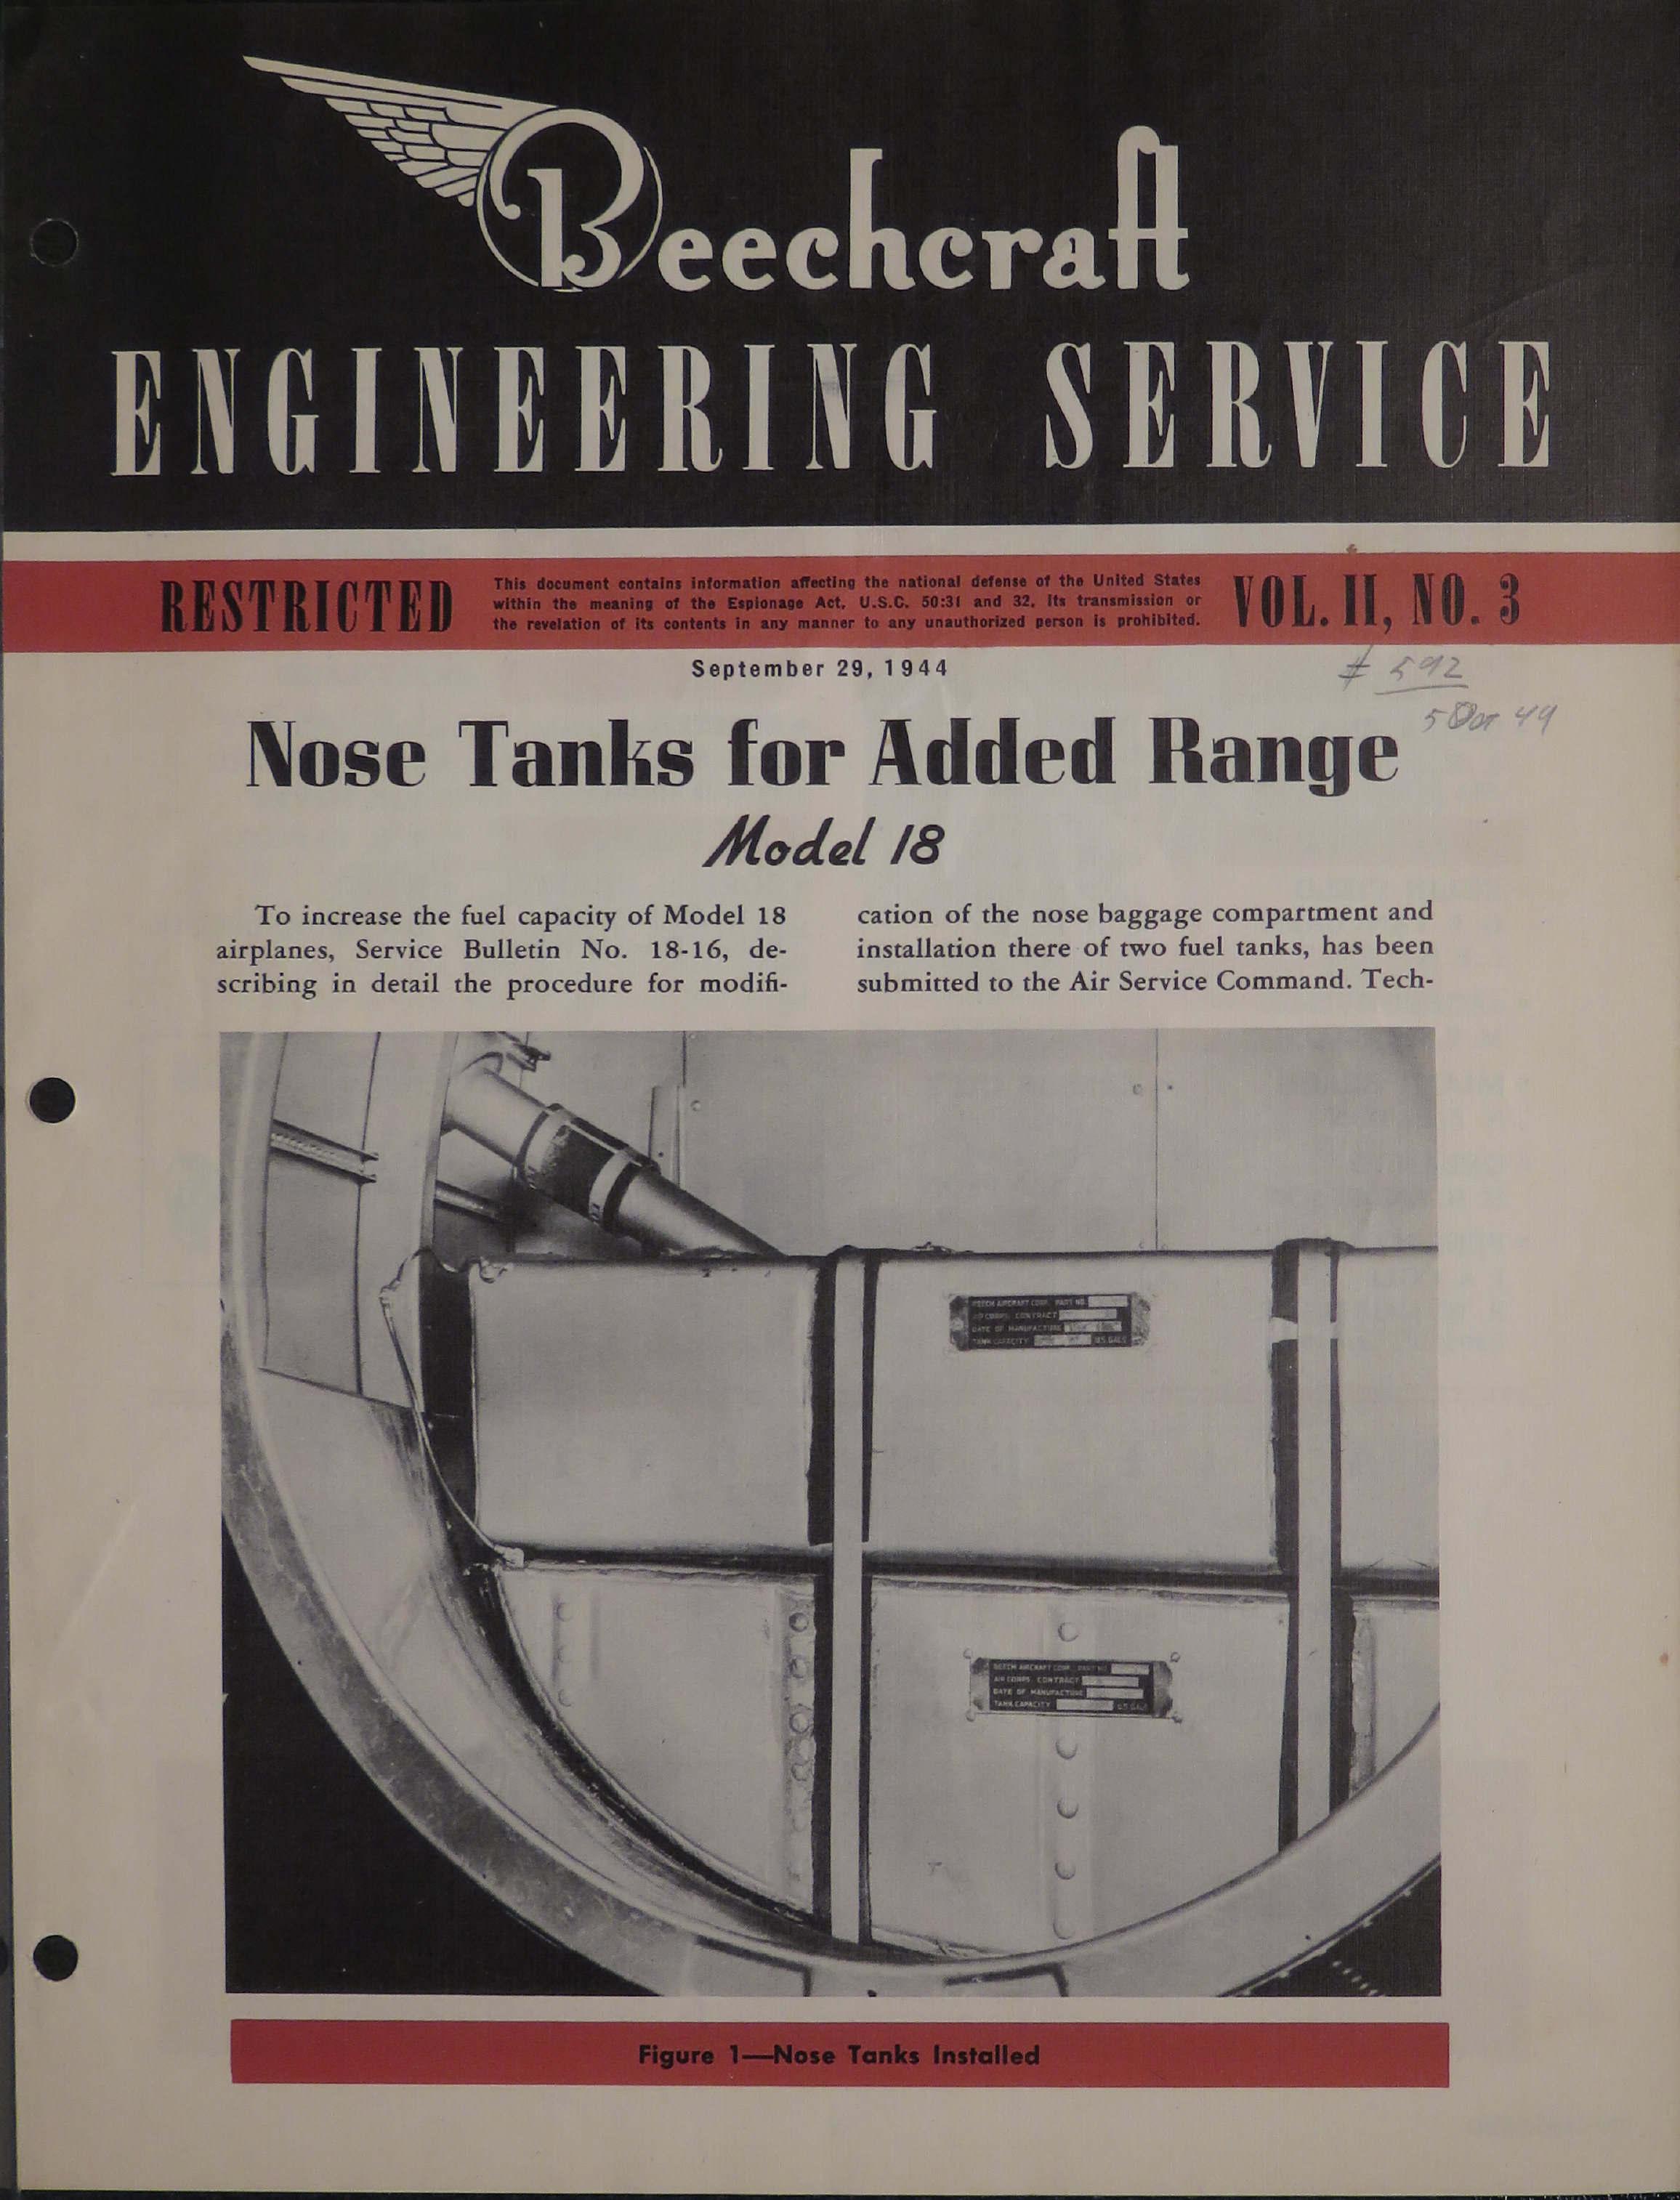 Sample page 1 from AirCorps Library document: Vol. II, No. 3 - Beechcraft Engineering Service